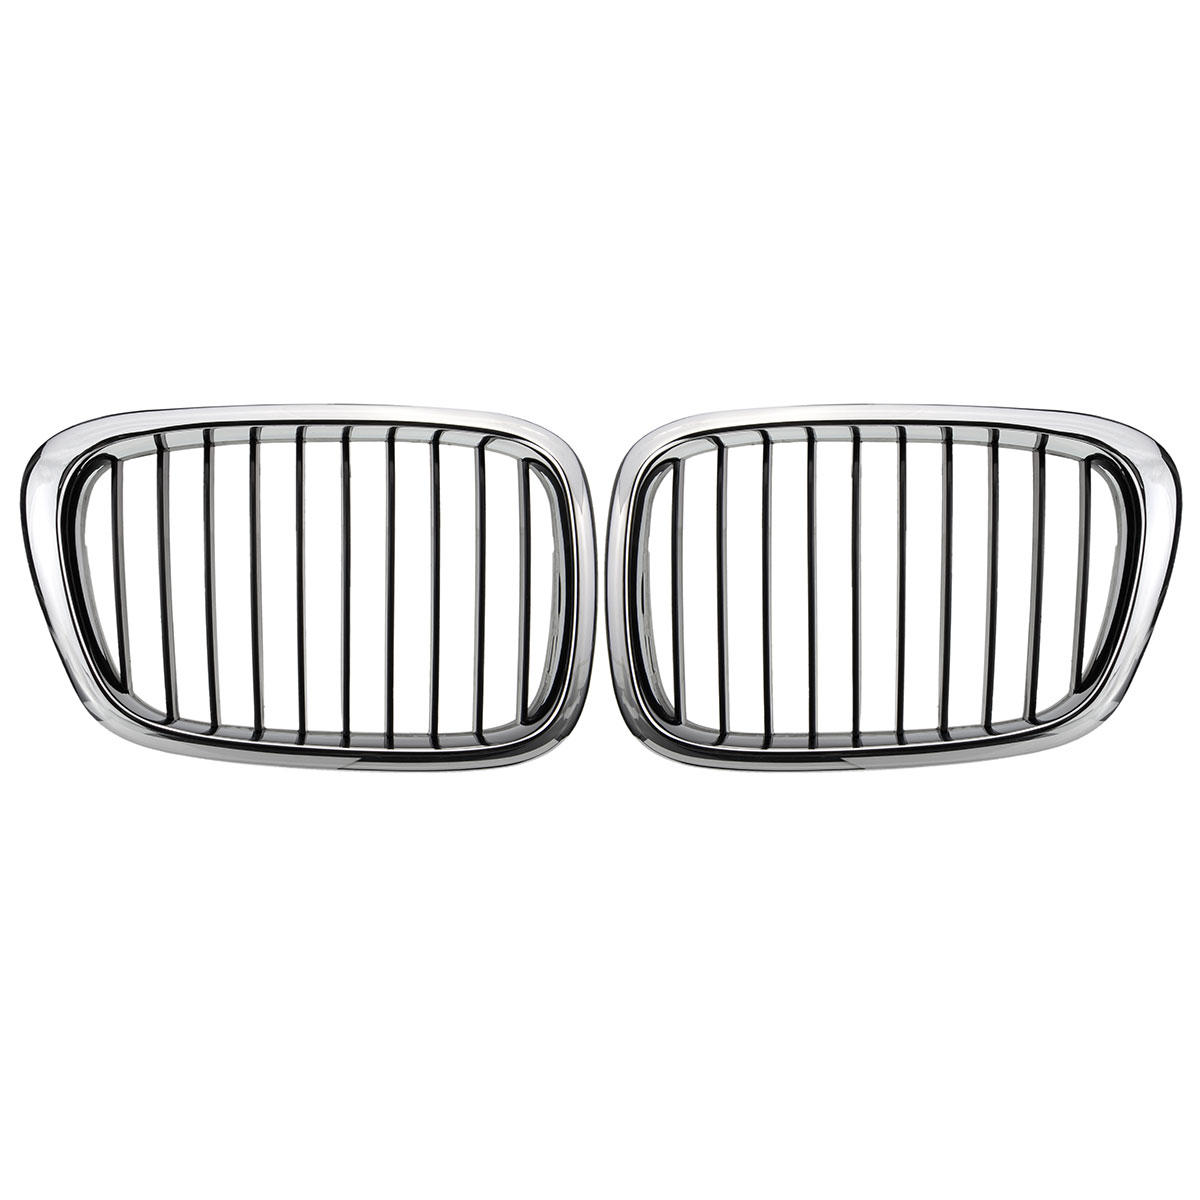 Chrome Black Front Grille Grill For BMW E39 5 Series 525 530 535 540 M5 1995-2003